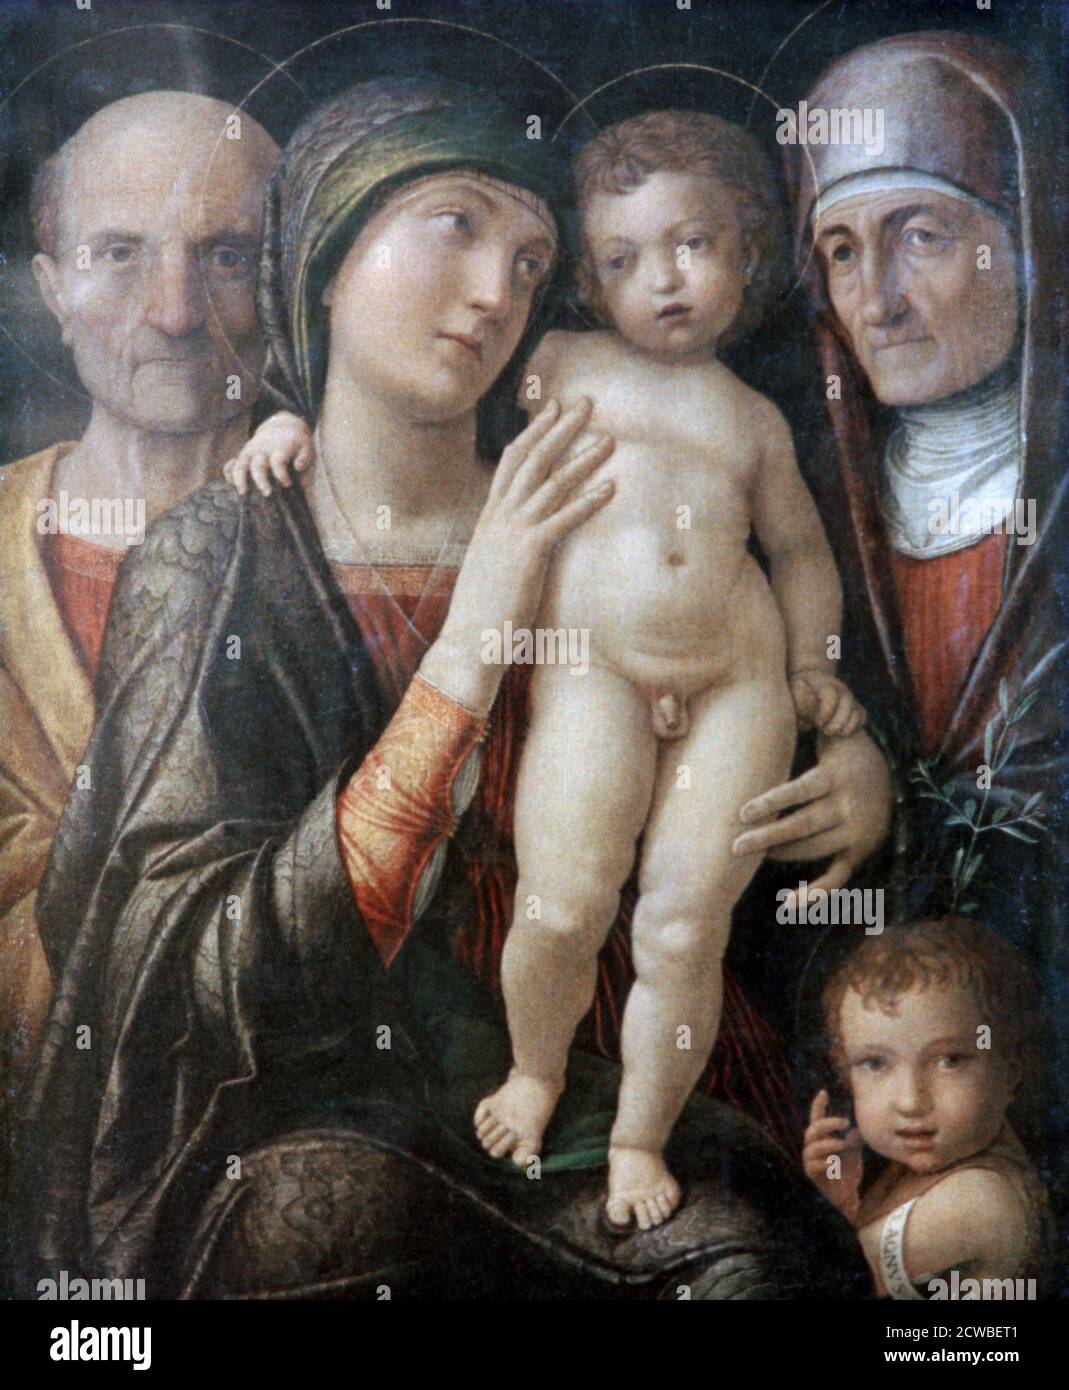 Holy Family with St Elizabeth and St John the Baptist as a Child', c1495-1500. Artist: Andrea Mantegna. Andrea Mantegna (1431-1506) was an Italian painter, a student of Roman archaeology, and son-in-law of Jacopo Bellini. Stock Photo